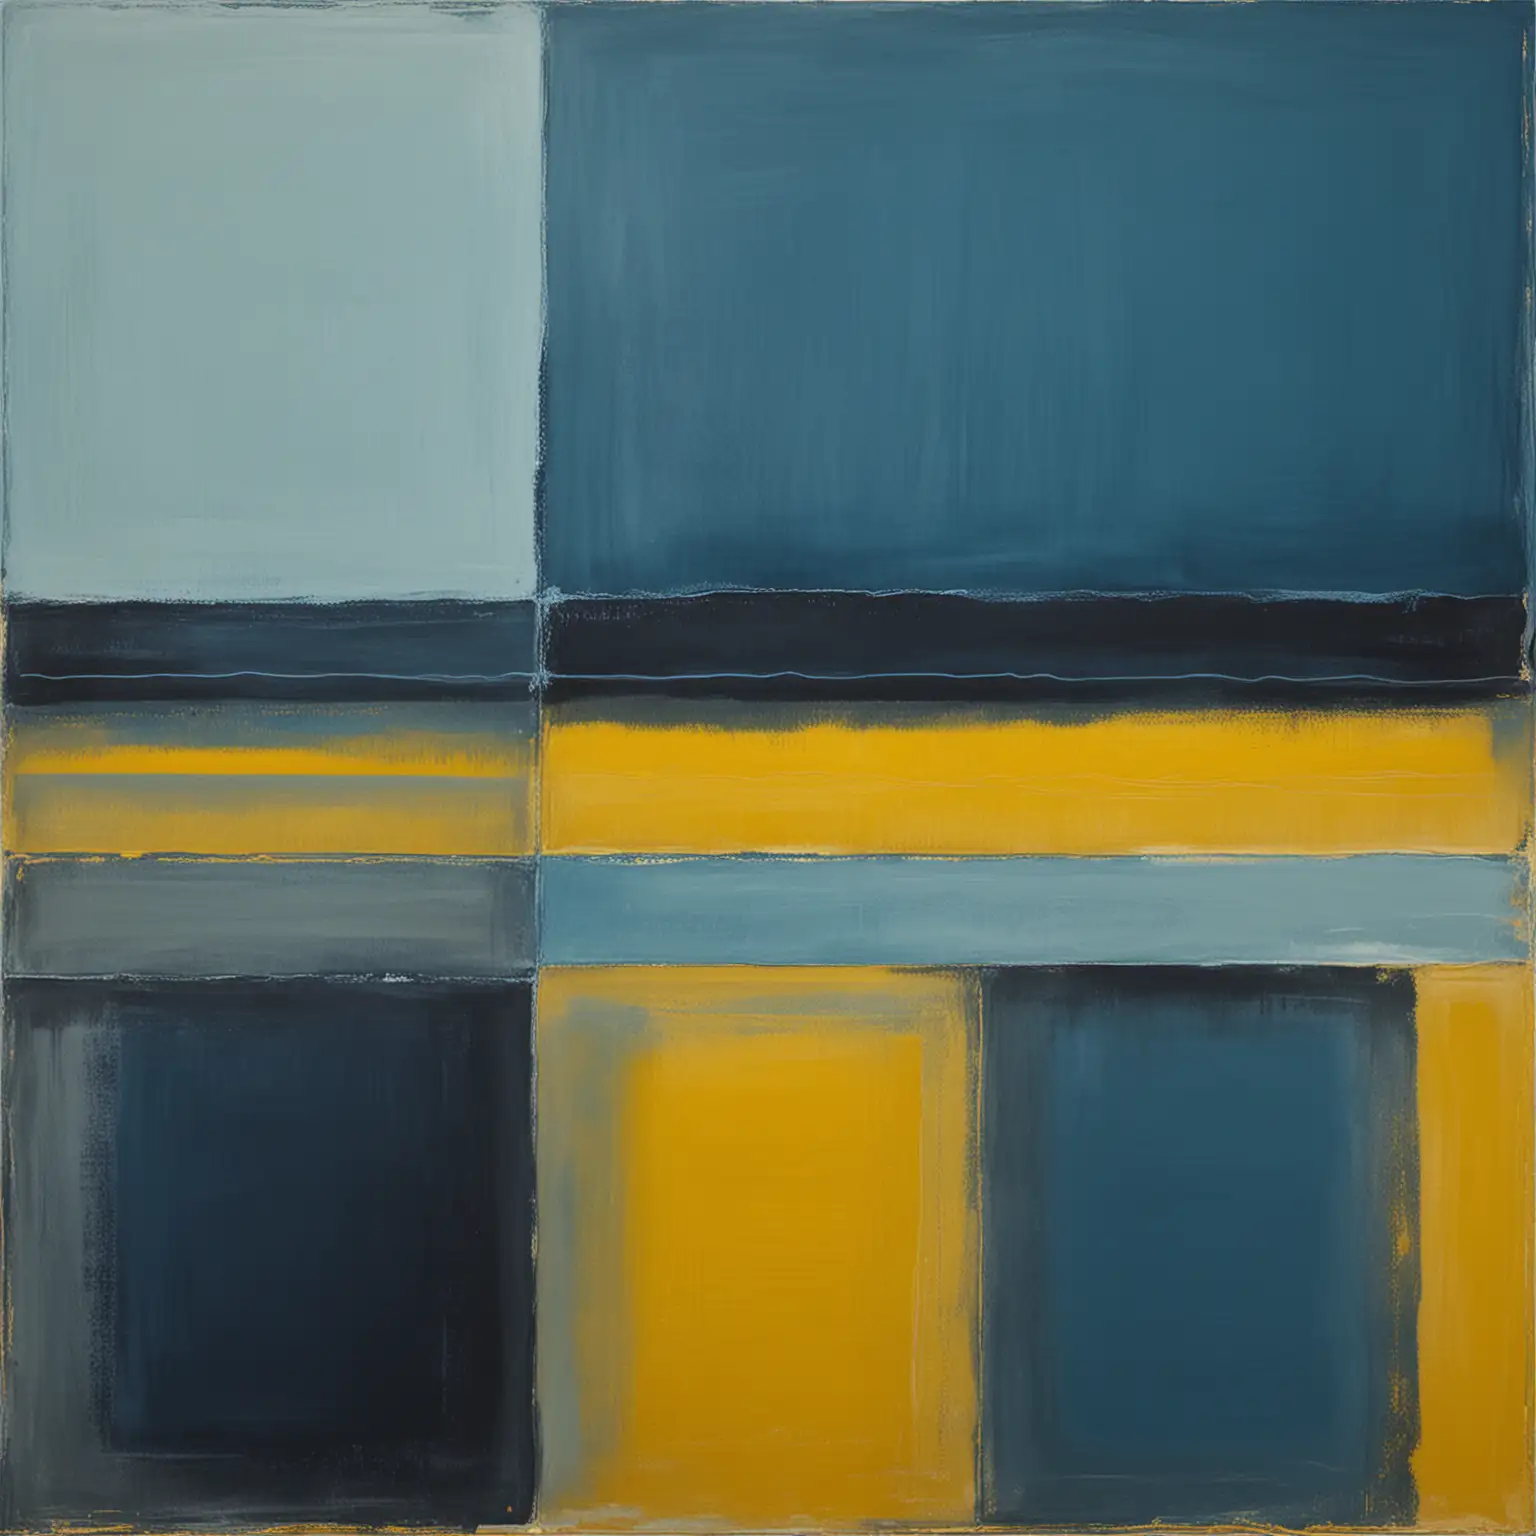 Abstract Statements in Rothko style, blue and yellow, no magenta or green